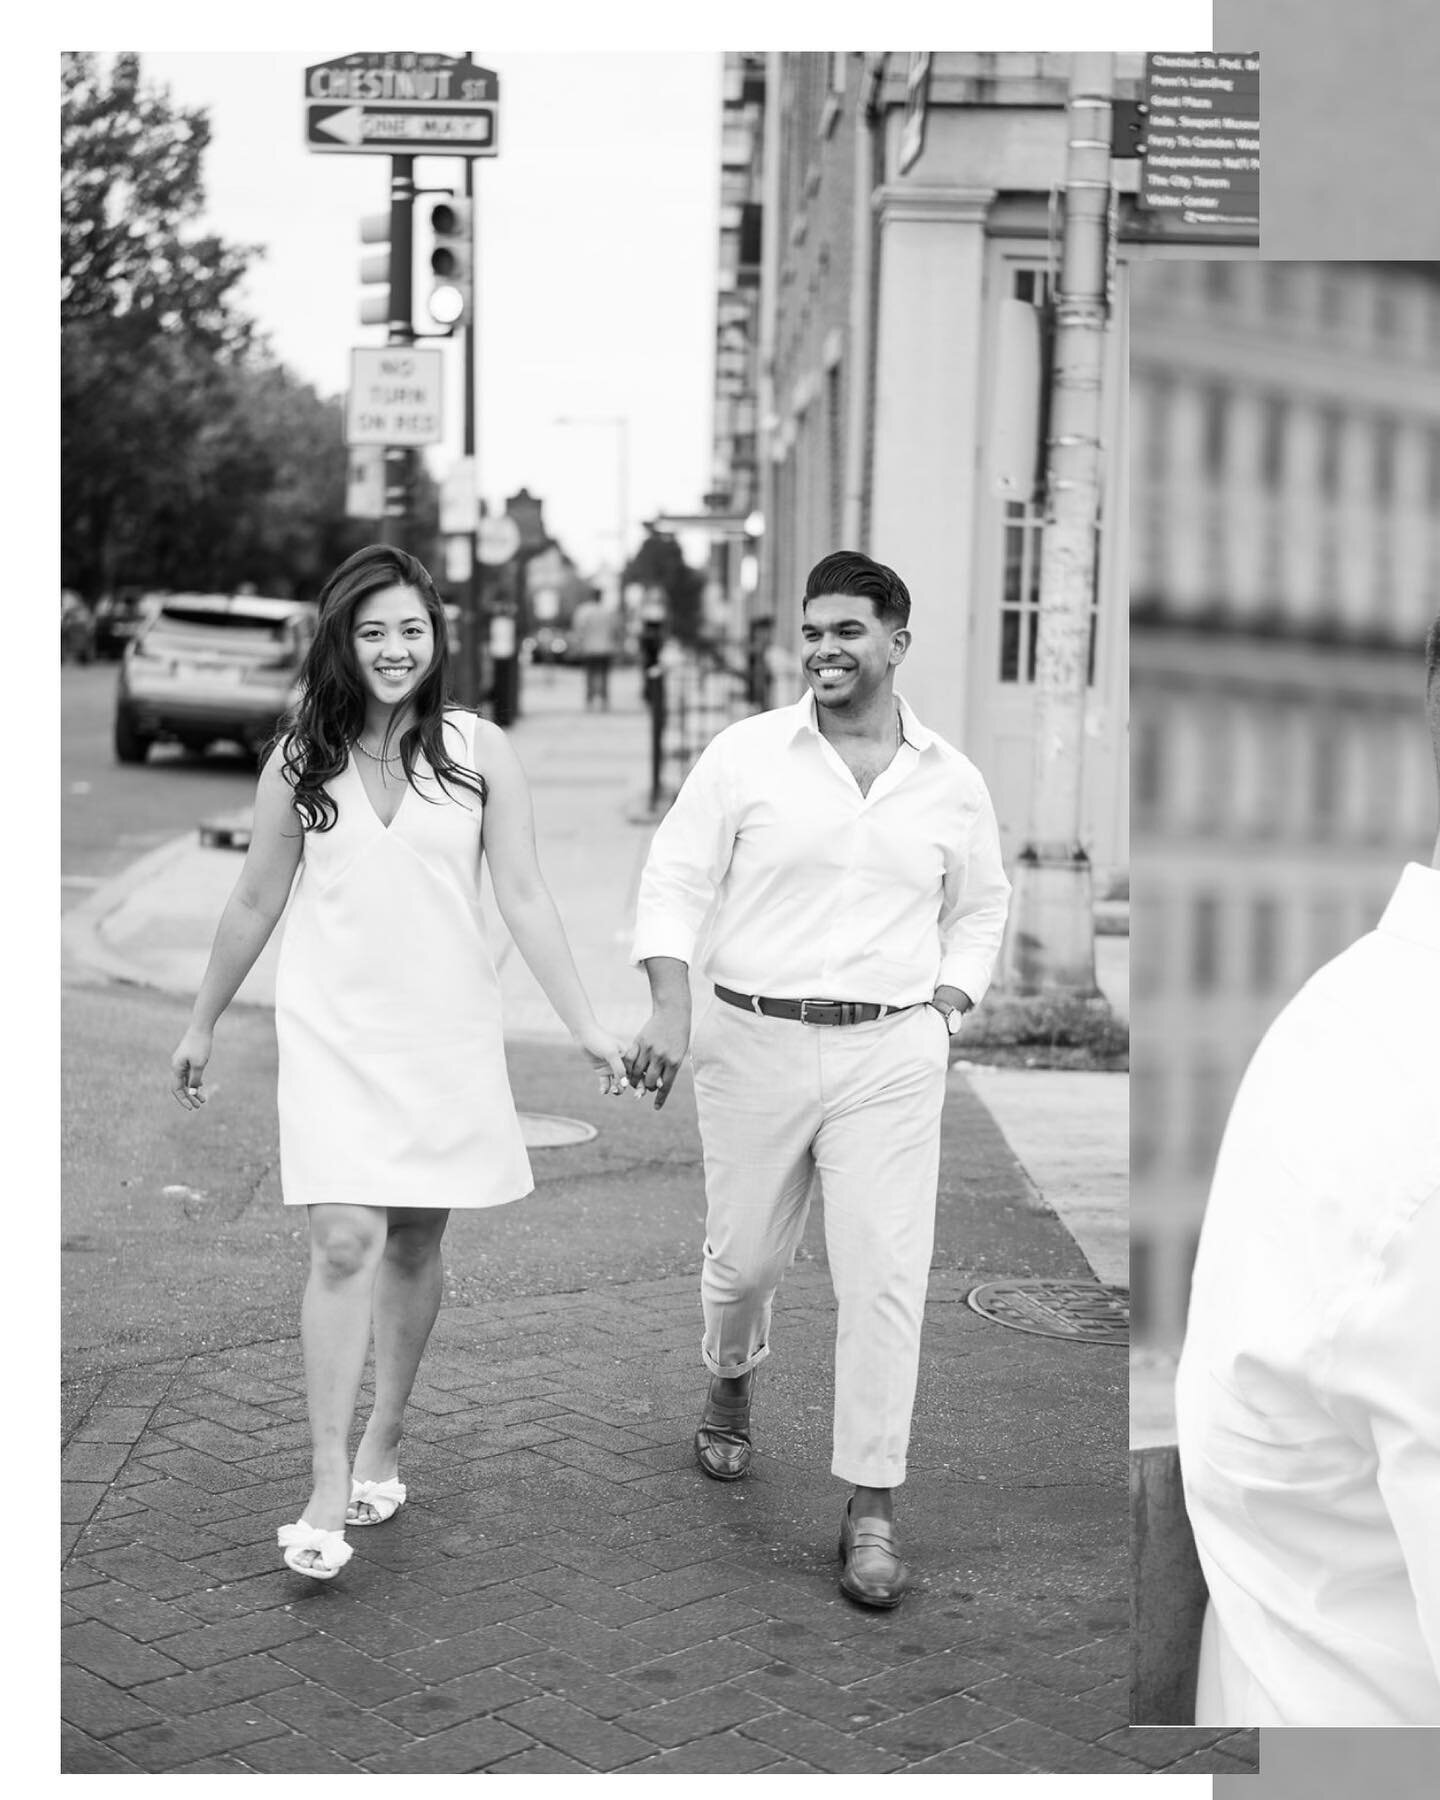 It doesn&rsquo;t get much more classic than black and white | B + N 
.
.
.
.
.
#engagementsession #engagementphotography #philadelphiacouples #phillybride #blackandwhitephotography #engagement #engagementphotos #engaged #engagementshoot #engagementph